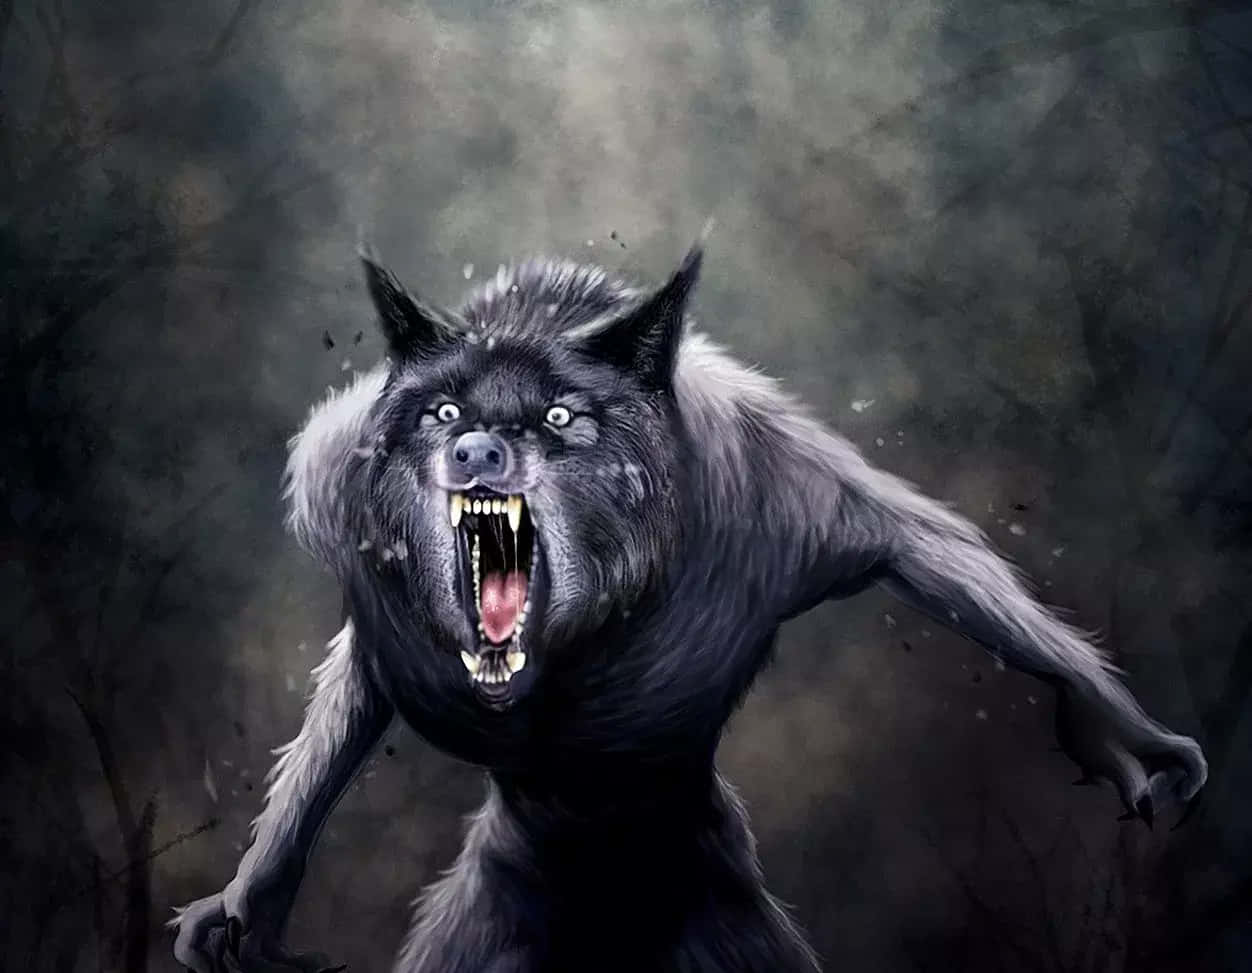 A Howling Werewolf in the Moonlight